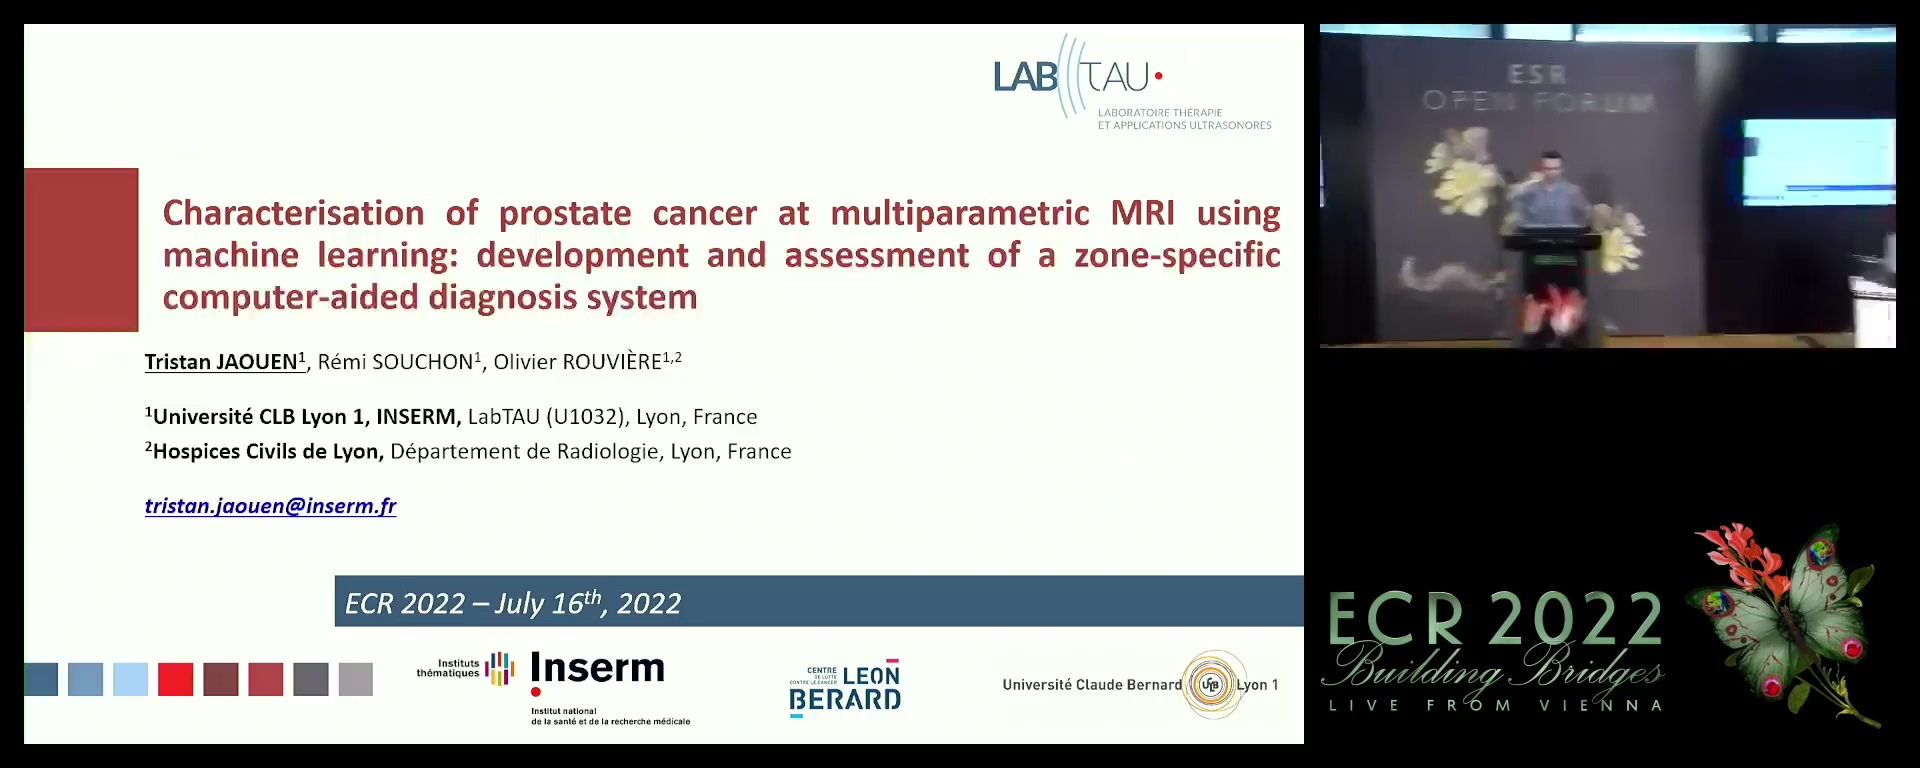 Characterisation of prostate cancer at multiparametric MRI using machine learning: development and assessment of a zone-specific computer-aided diagnosis system - Tristan Jaouen, LYON CEDEX 03 / FR